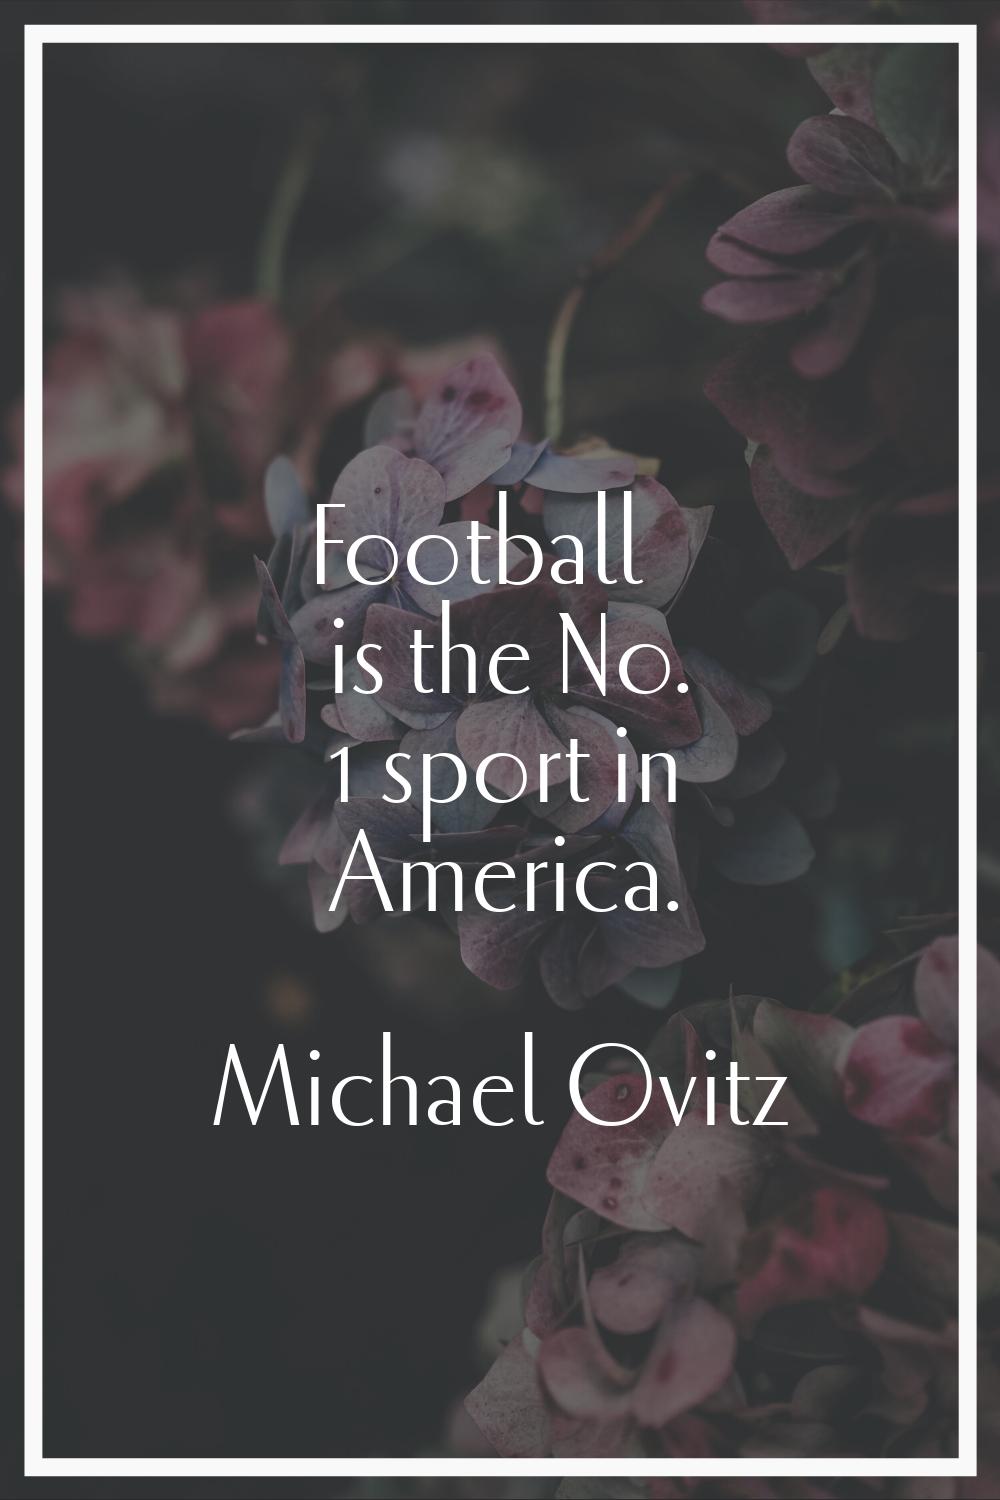 Football is the No. 1 sport in America.